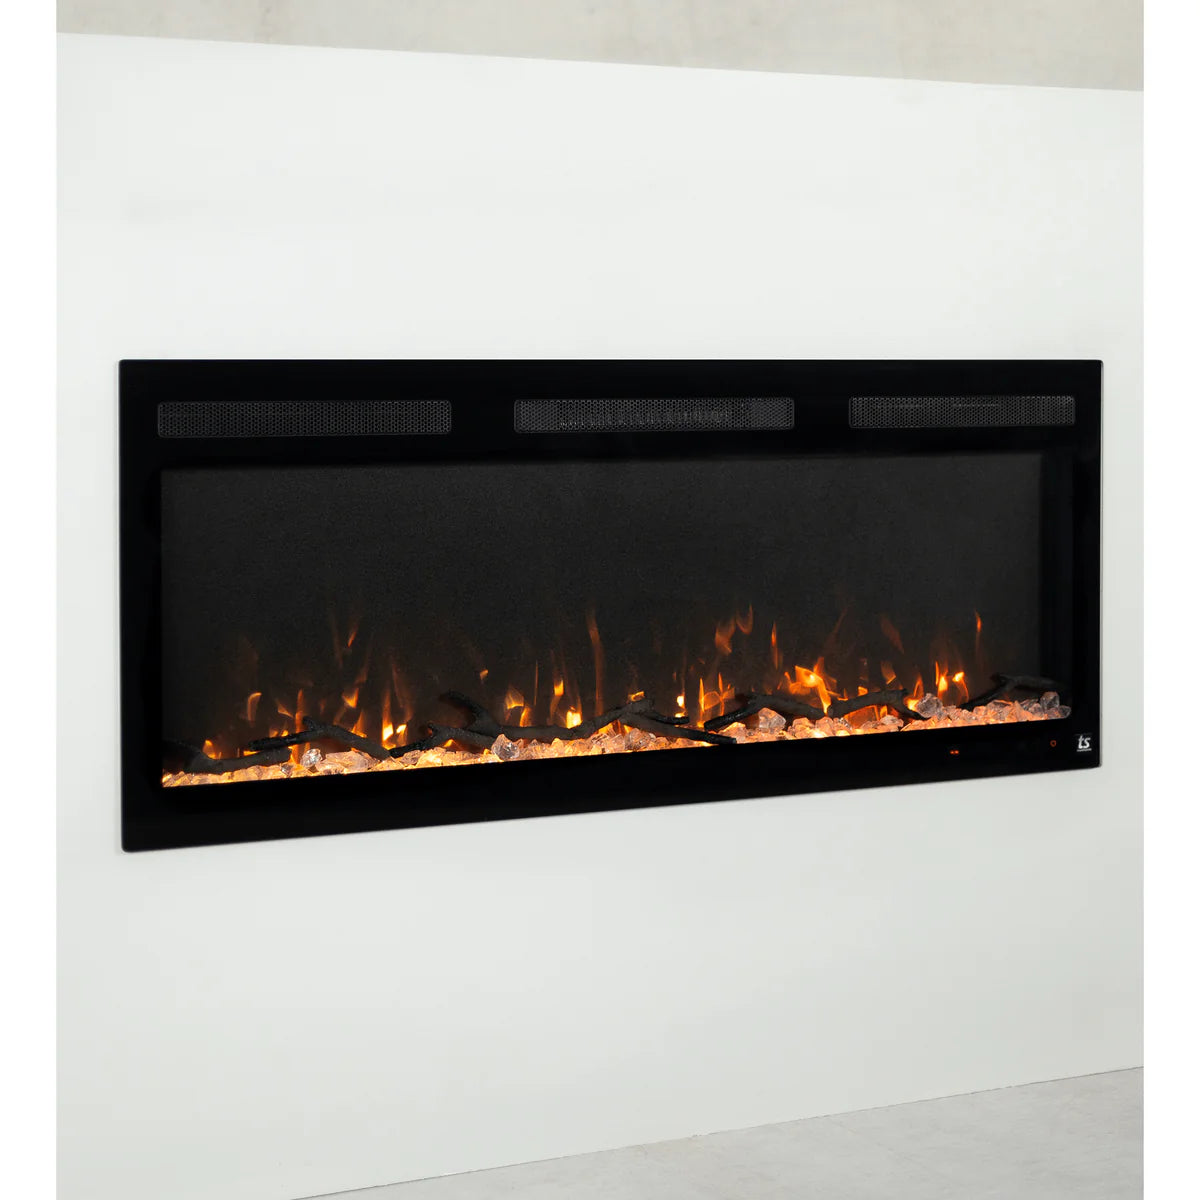 The Sideline Fury 57 Inch Recessed Smart Electric Fireplace 80055